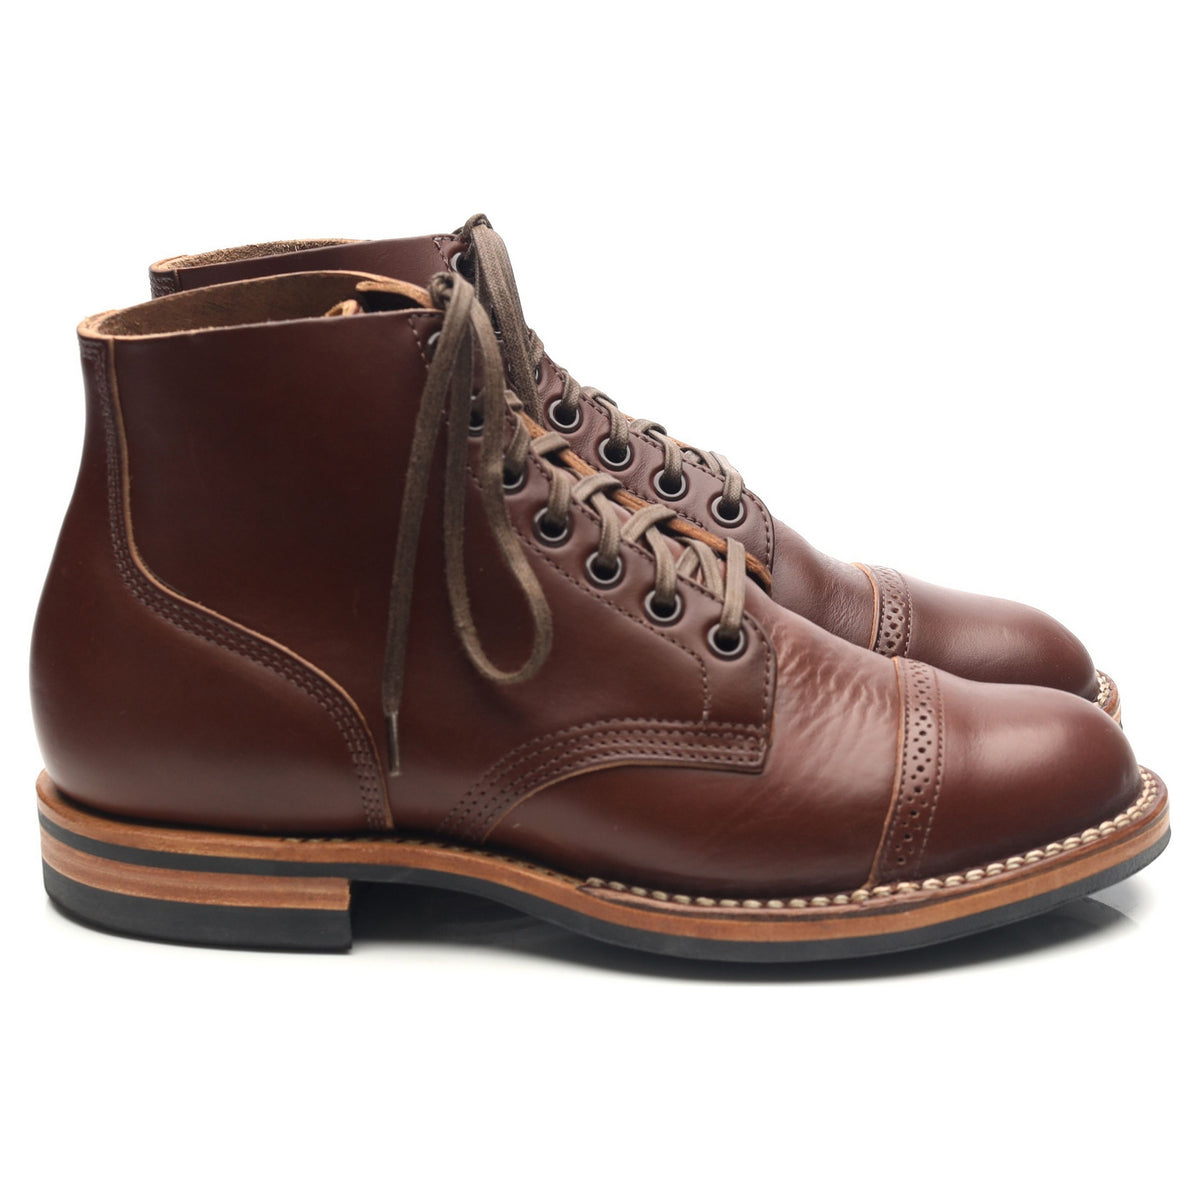 Brown Leather Service Boots UK 6.5 E